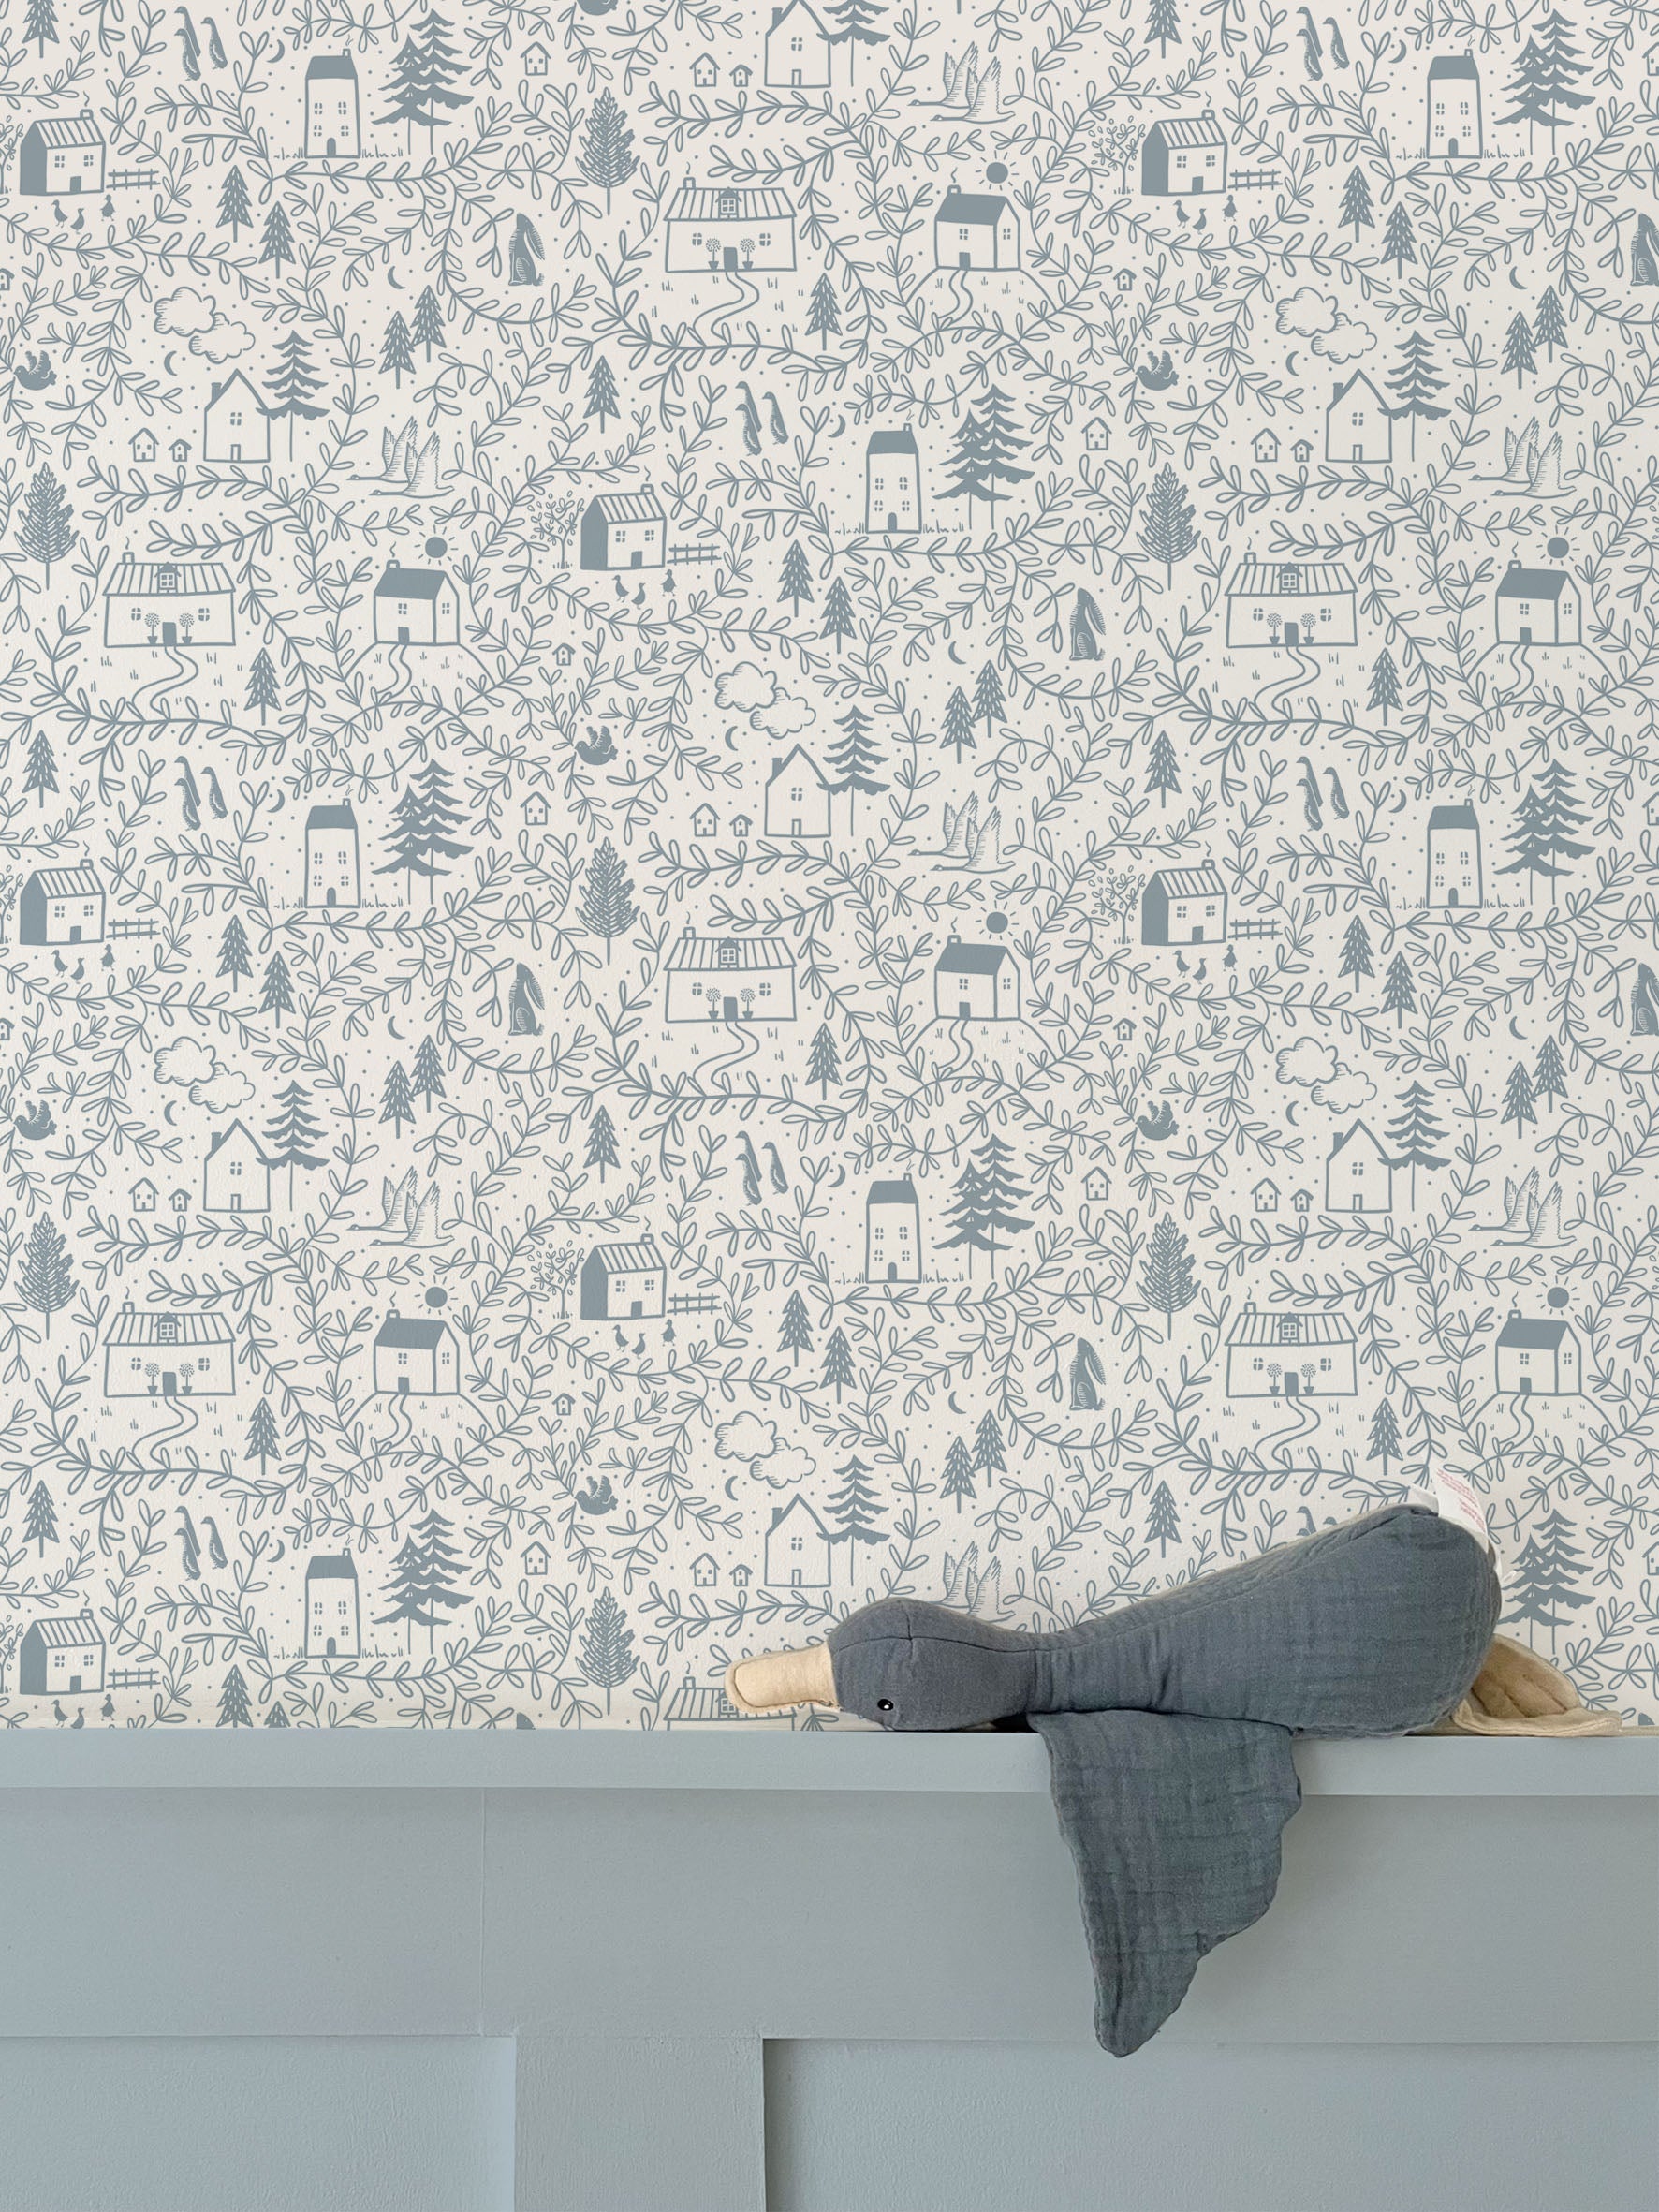 Cottages in the woods luxury children's wallpaper featured above blue wall panelling with soft toy duck